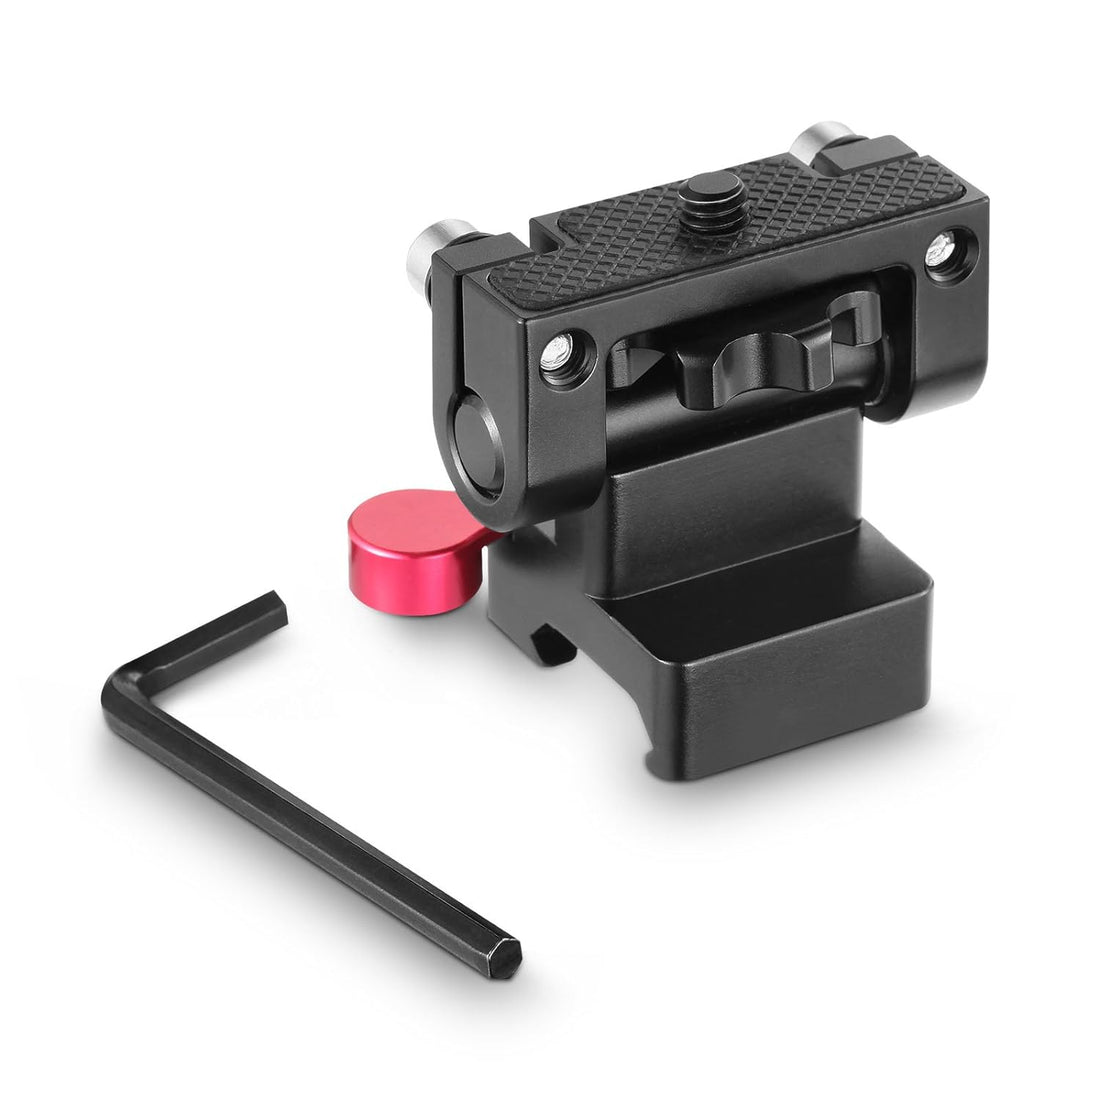 SMALLRIG Field Monitor Holder Mount with Quick Release NATO Clamp - 2100